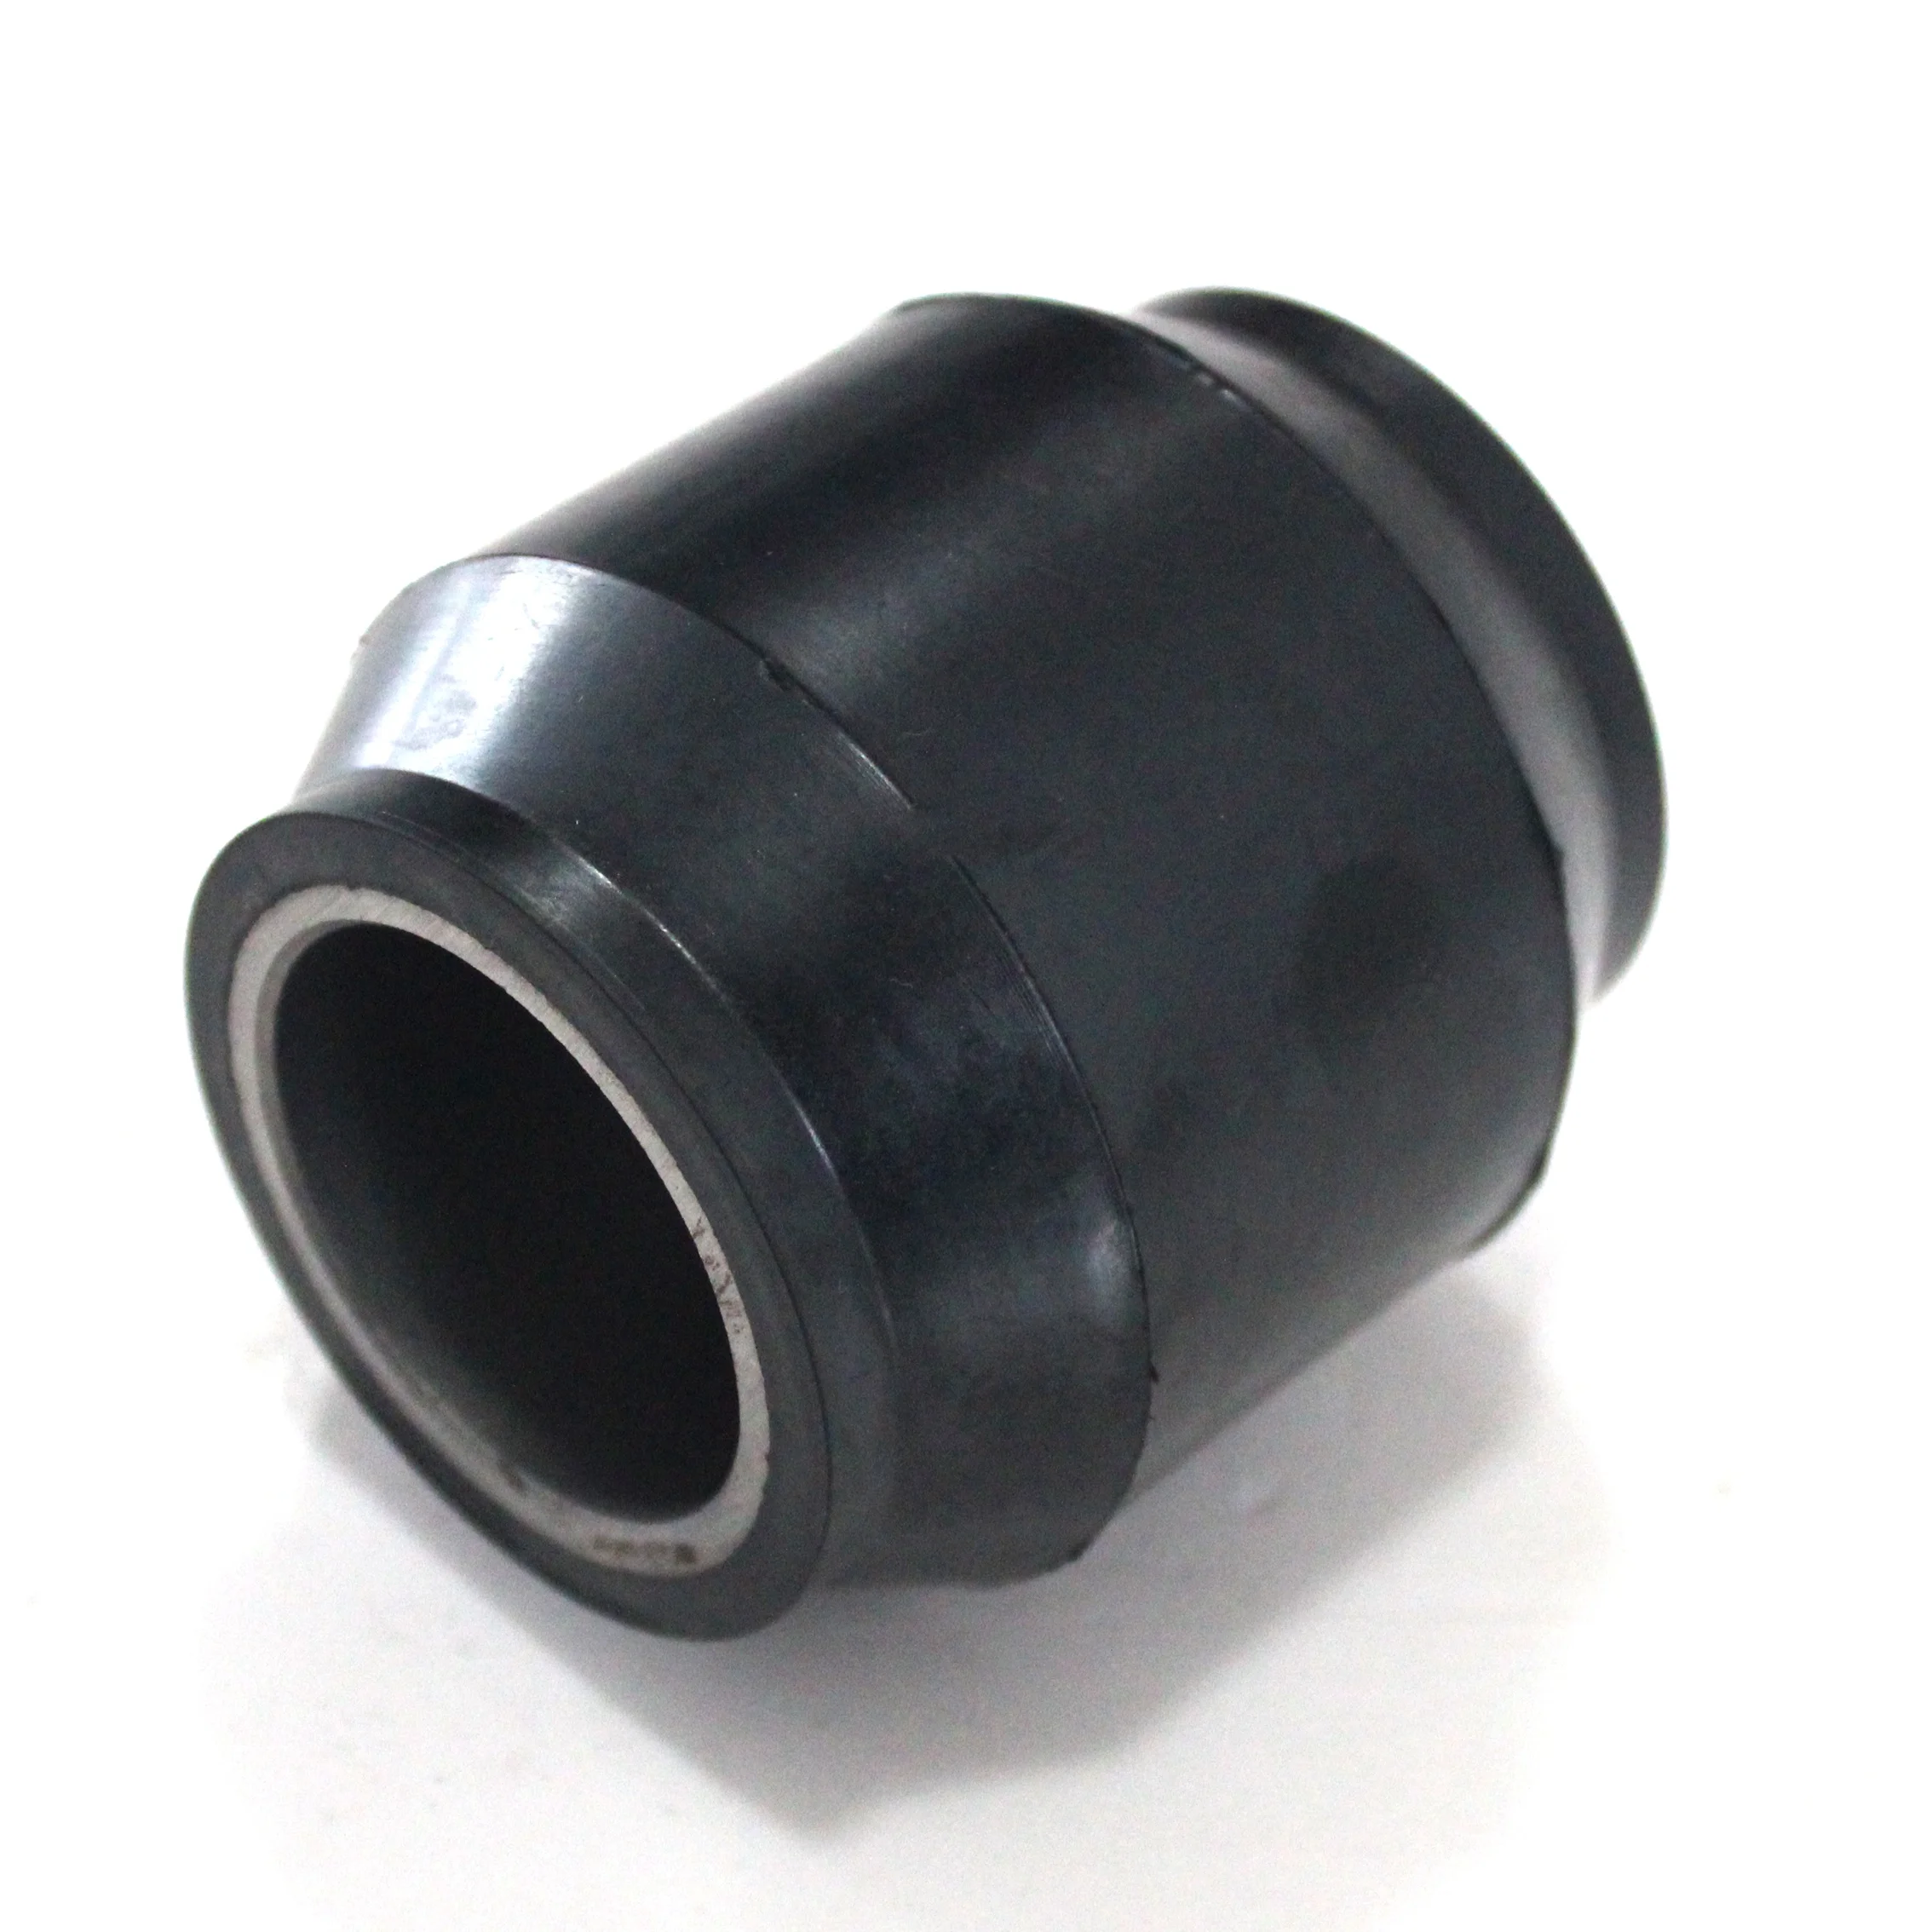 
OEM 0511393030 Rubber bushing for heavy truck made in China 36 * 65.5 * 68 